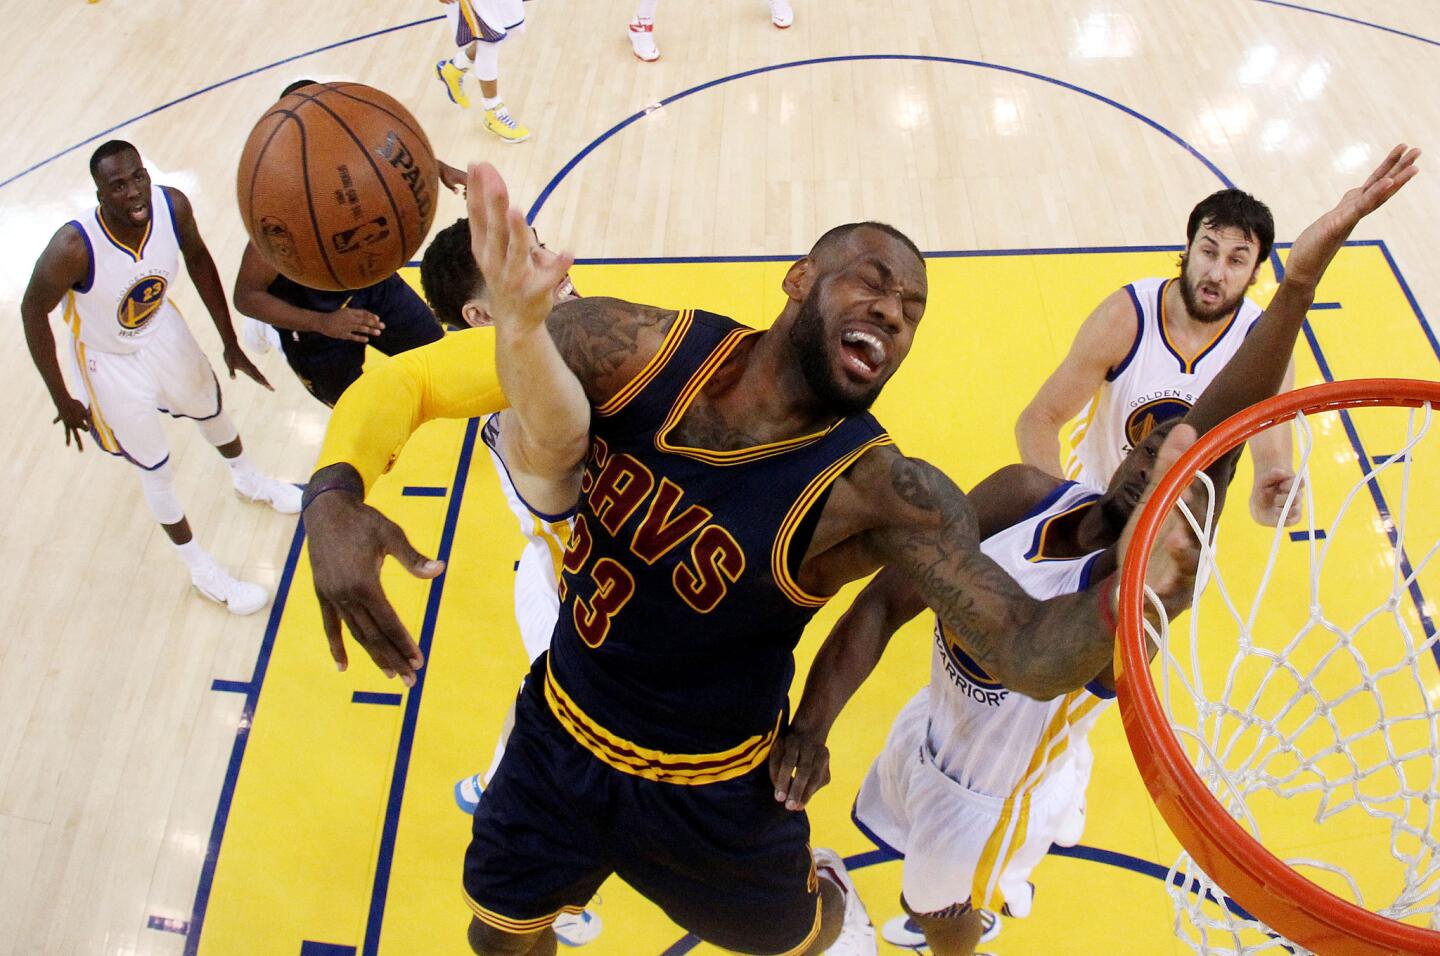 Cavaliers forward LeBron James gets tangled with Warriors guard Klay Thompson in the first half of Game 1 on Thursday night in Oakland.